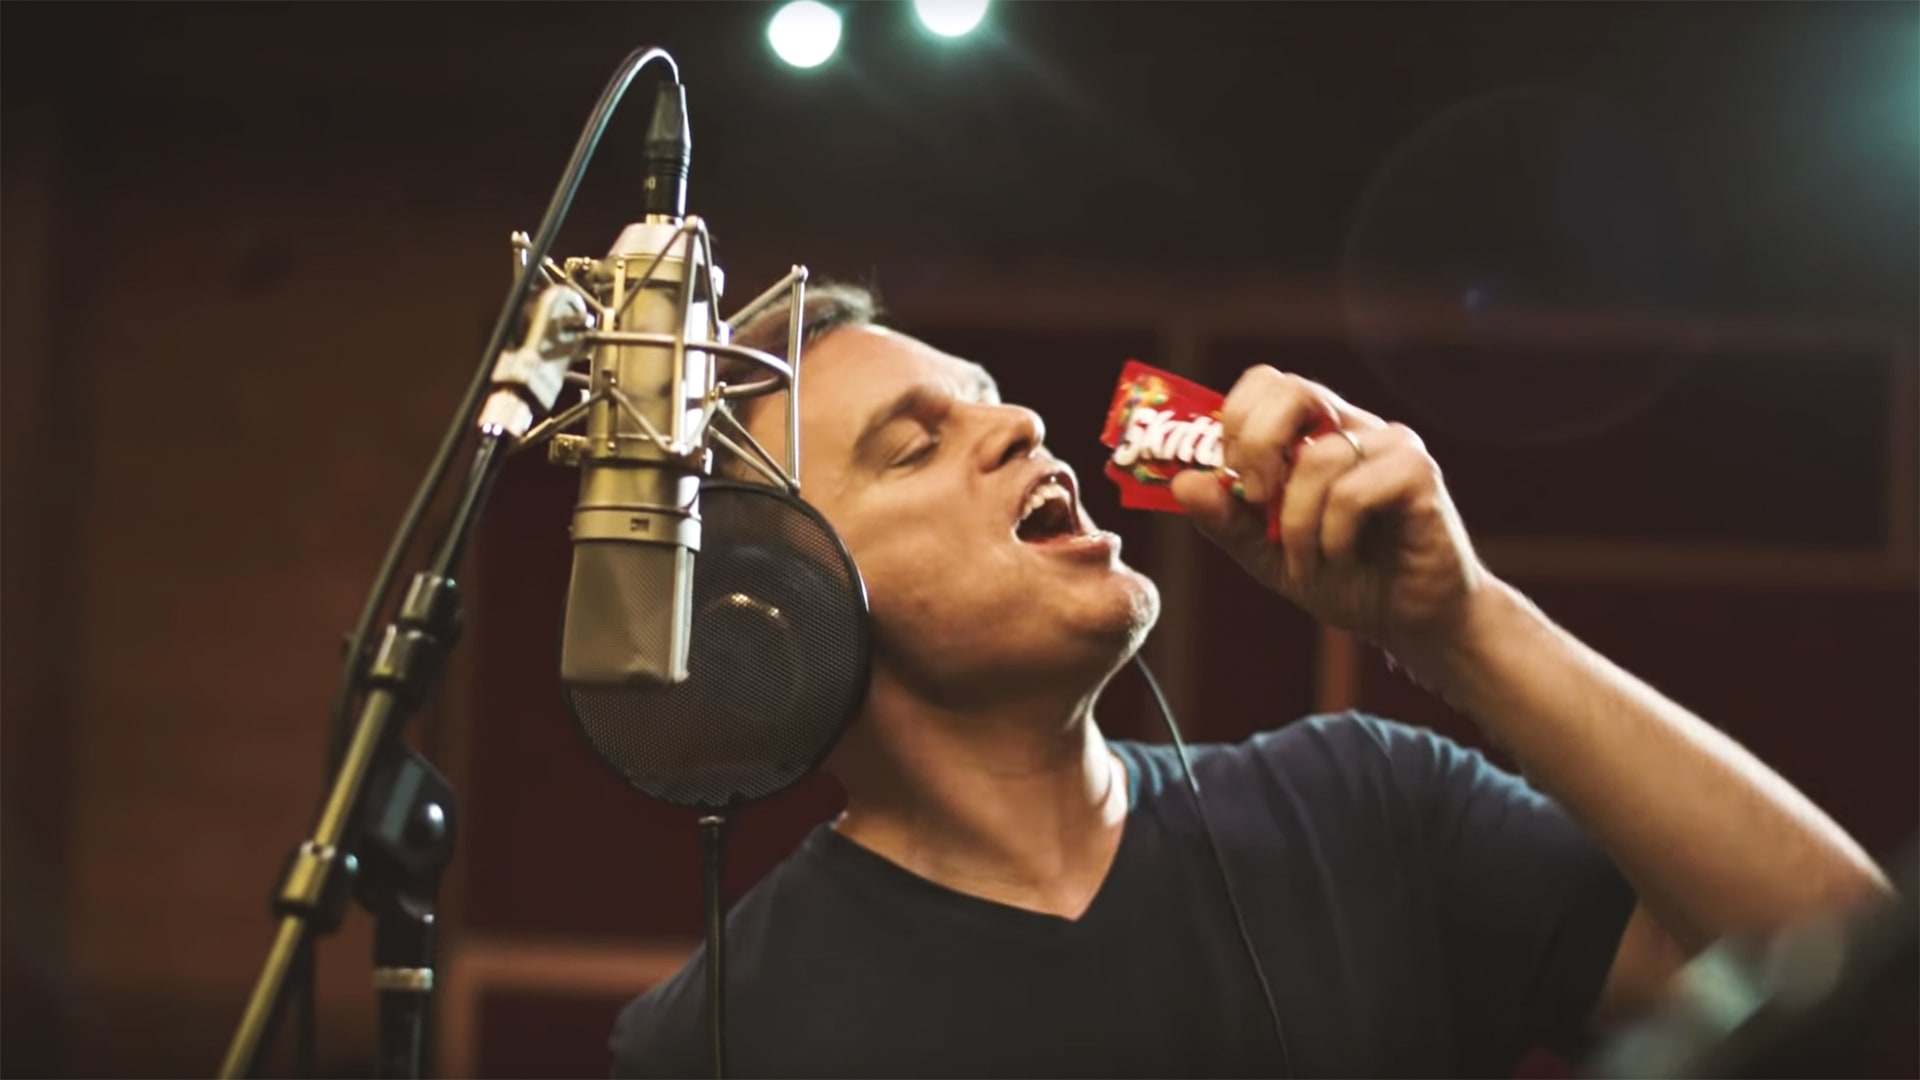 Skittles ruins ruining advertising by singing “Advertising Ruins Everything,” which is great